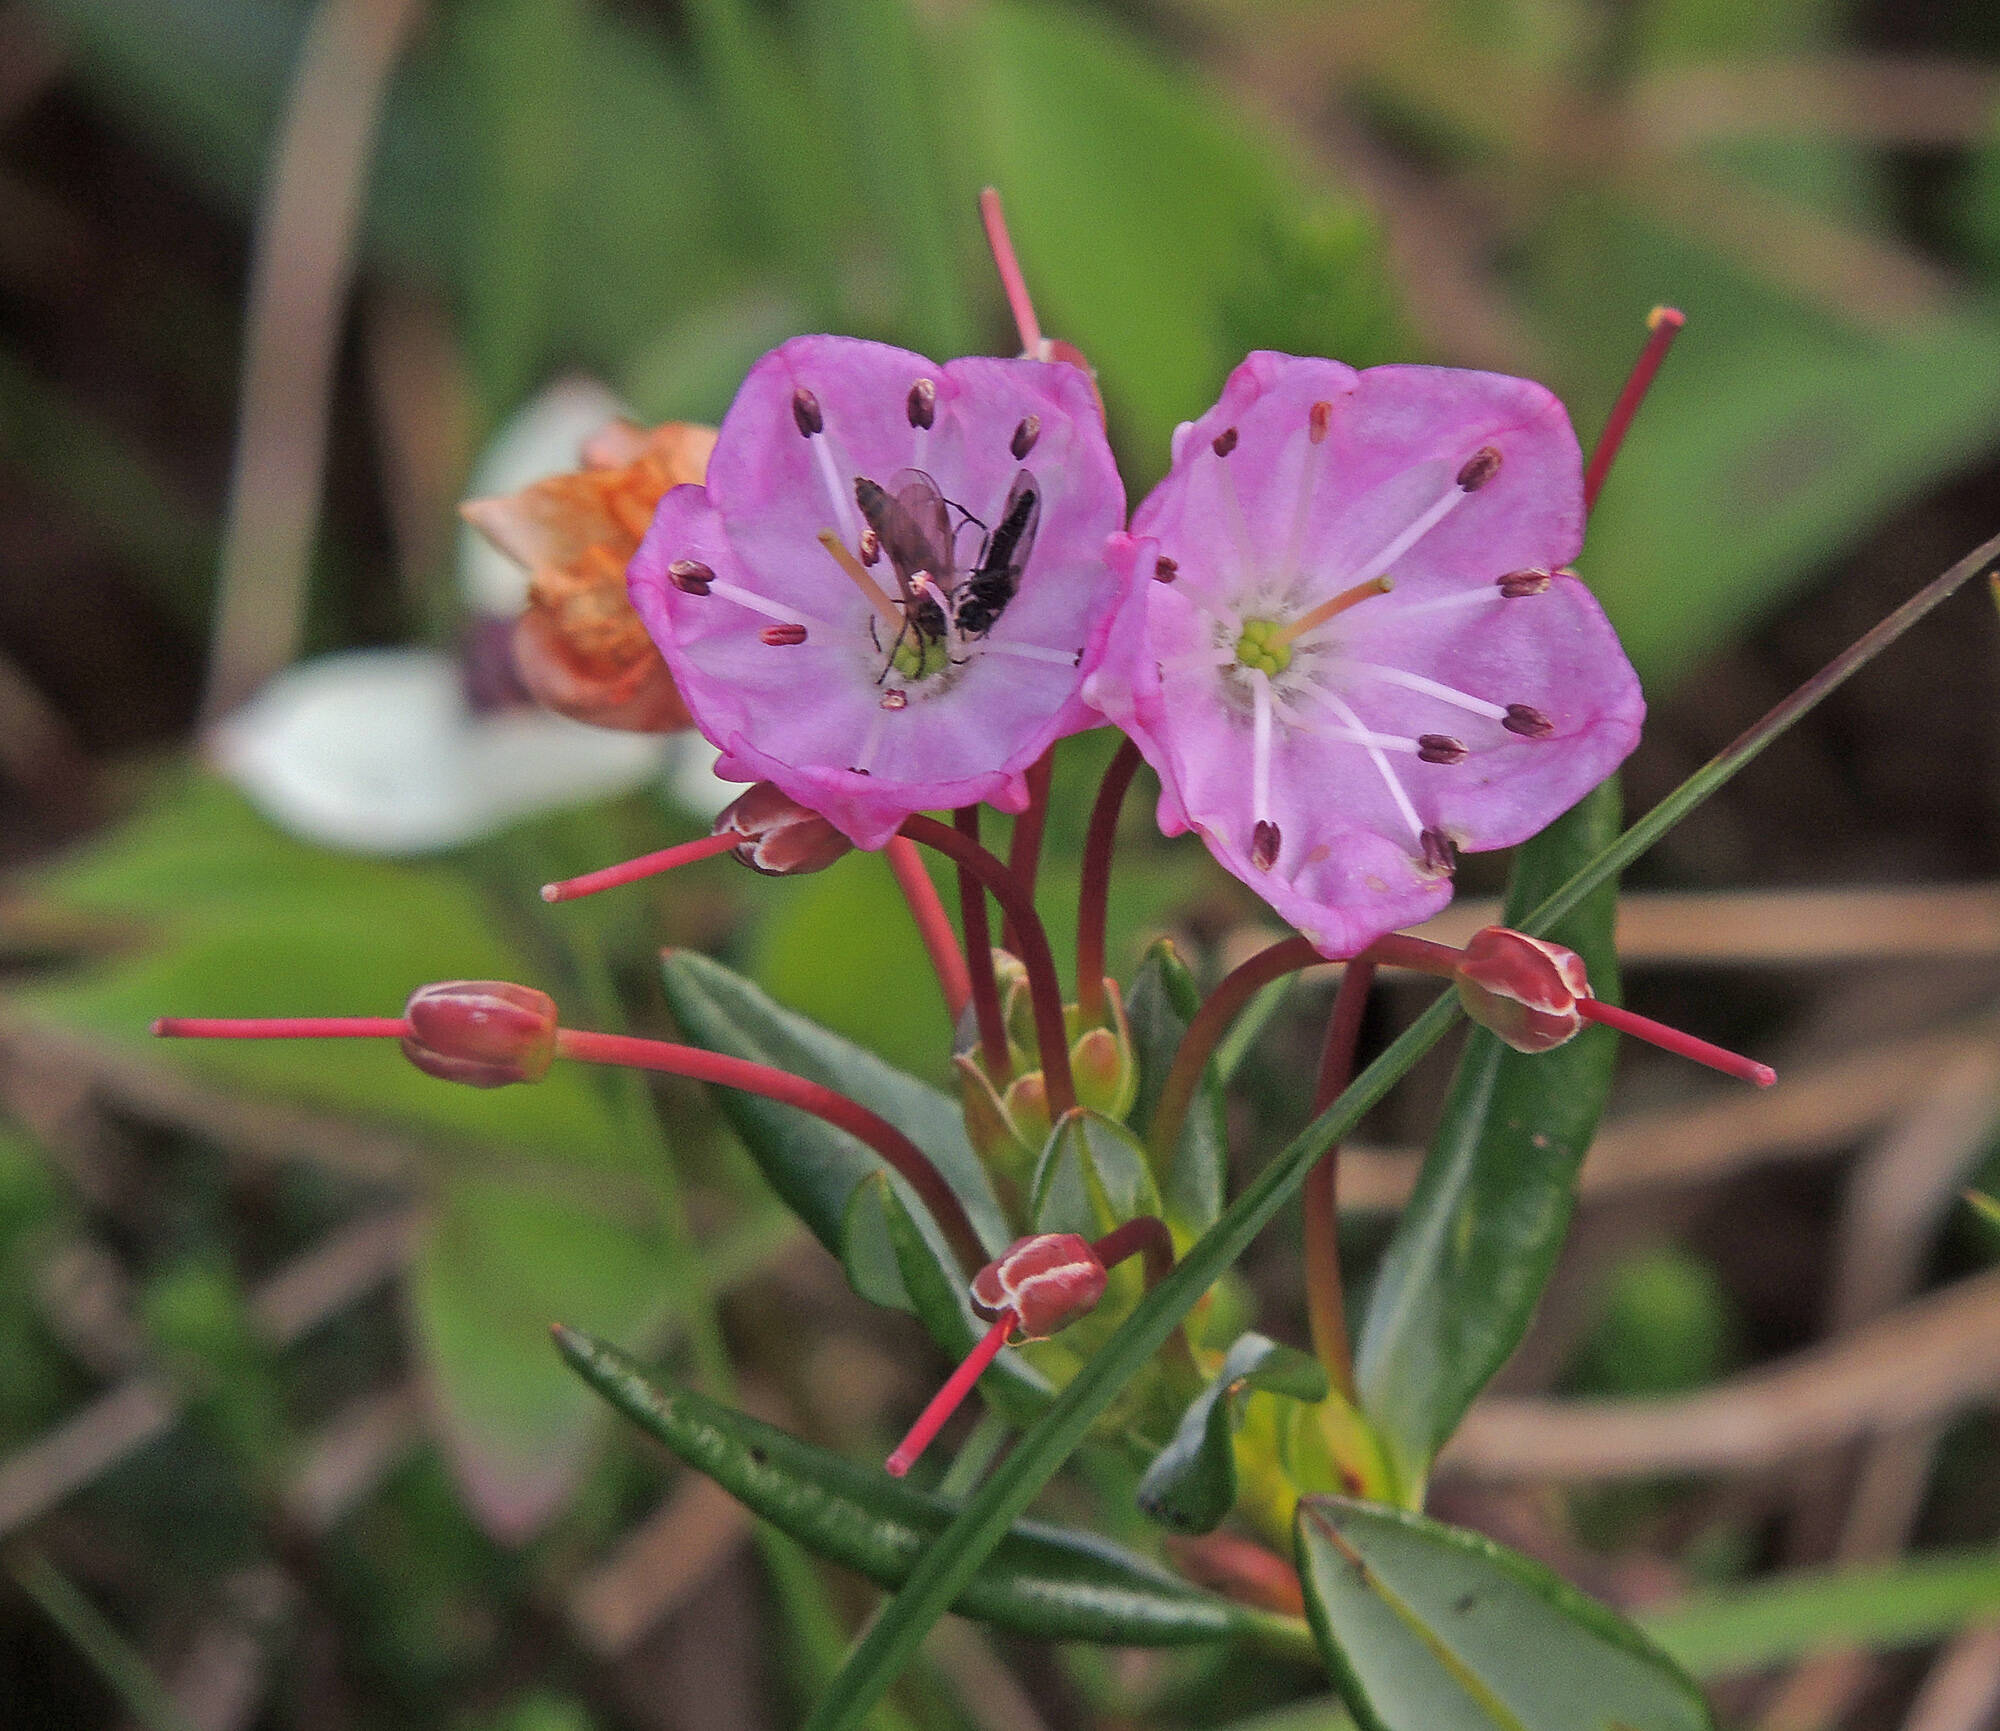 Bog laurel flowers with stamens sprung out from petals by foraging insects. (Courtesy Photo / Bob Armstrong)